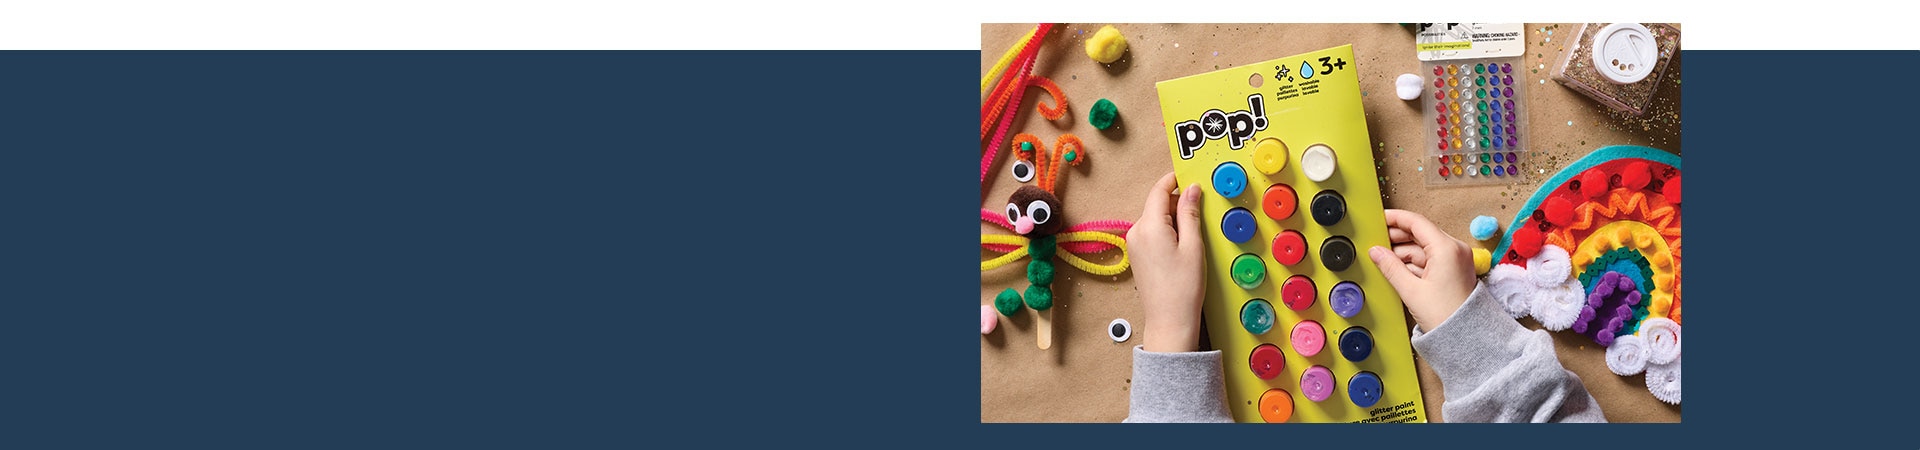 crafts to keep kids busy